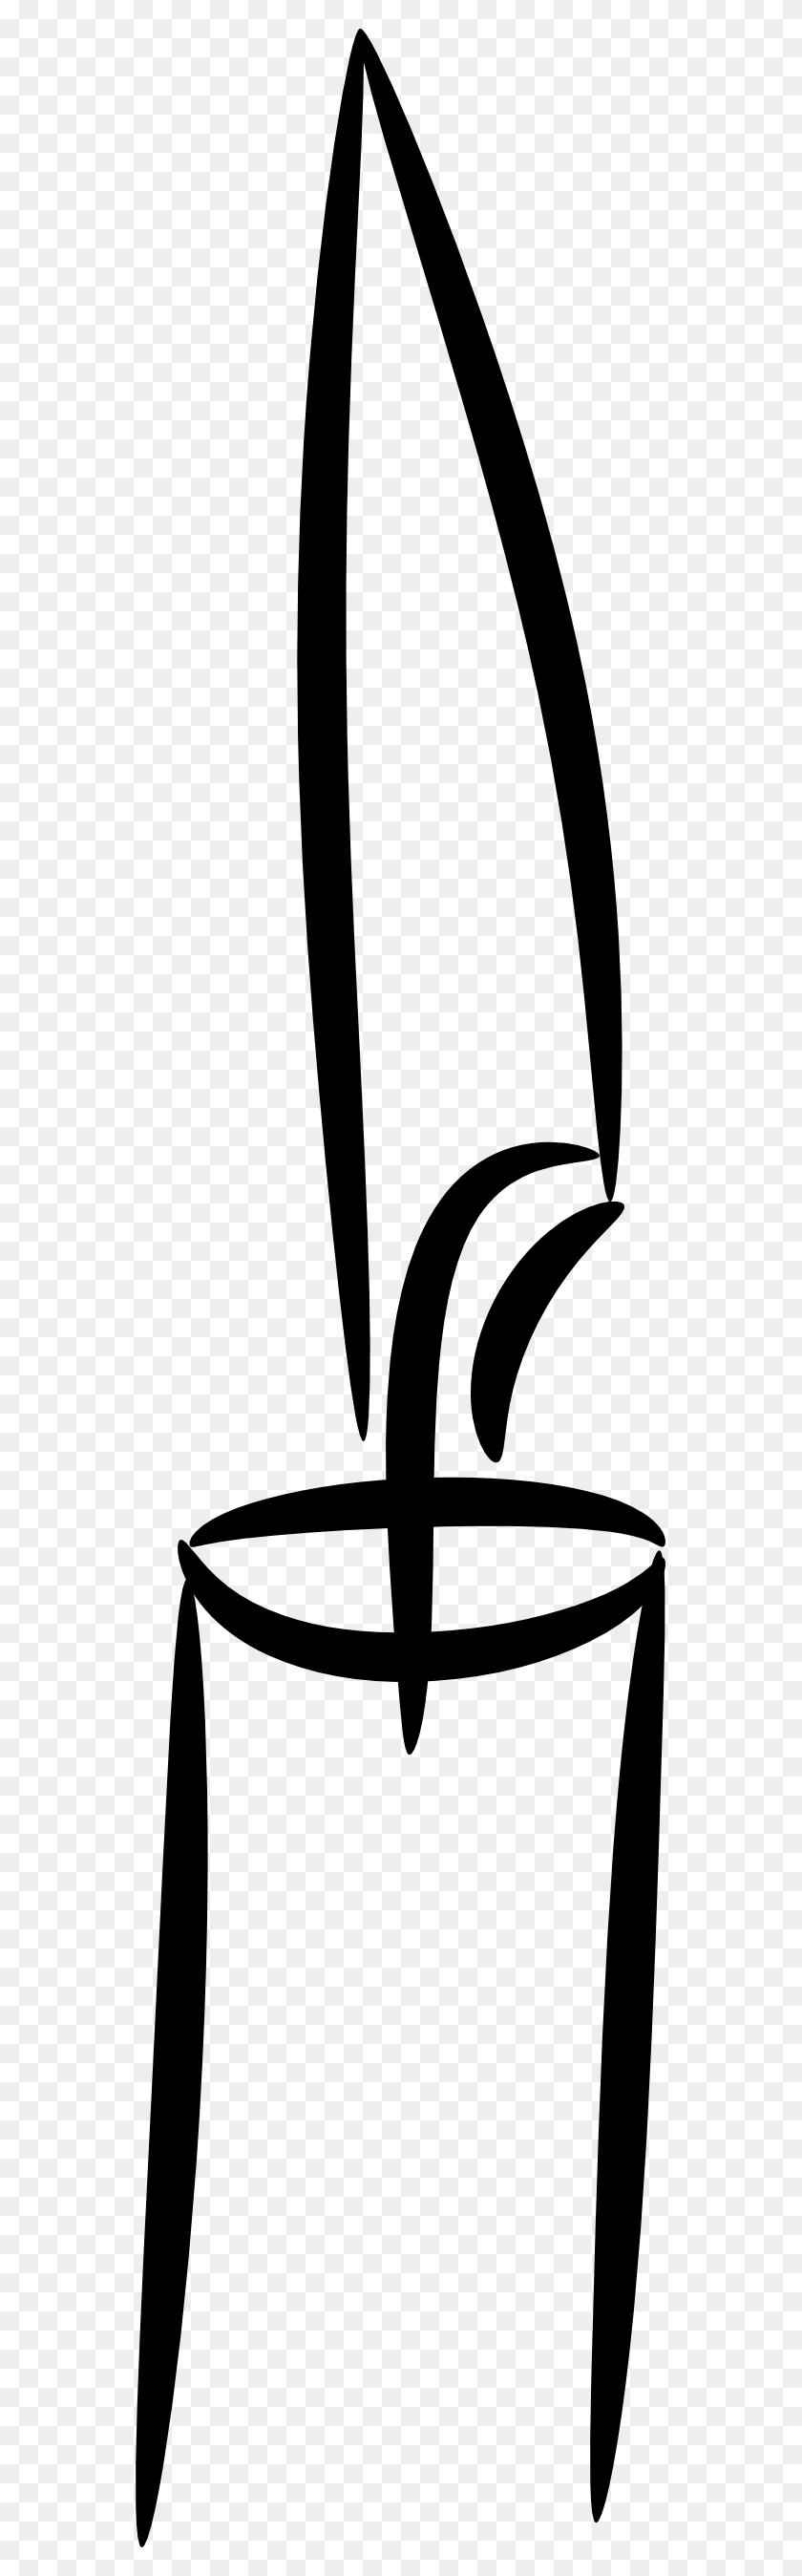 555x2637 Candle Clipart Black And White - Candlestick Clipart